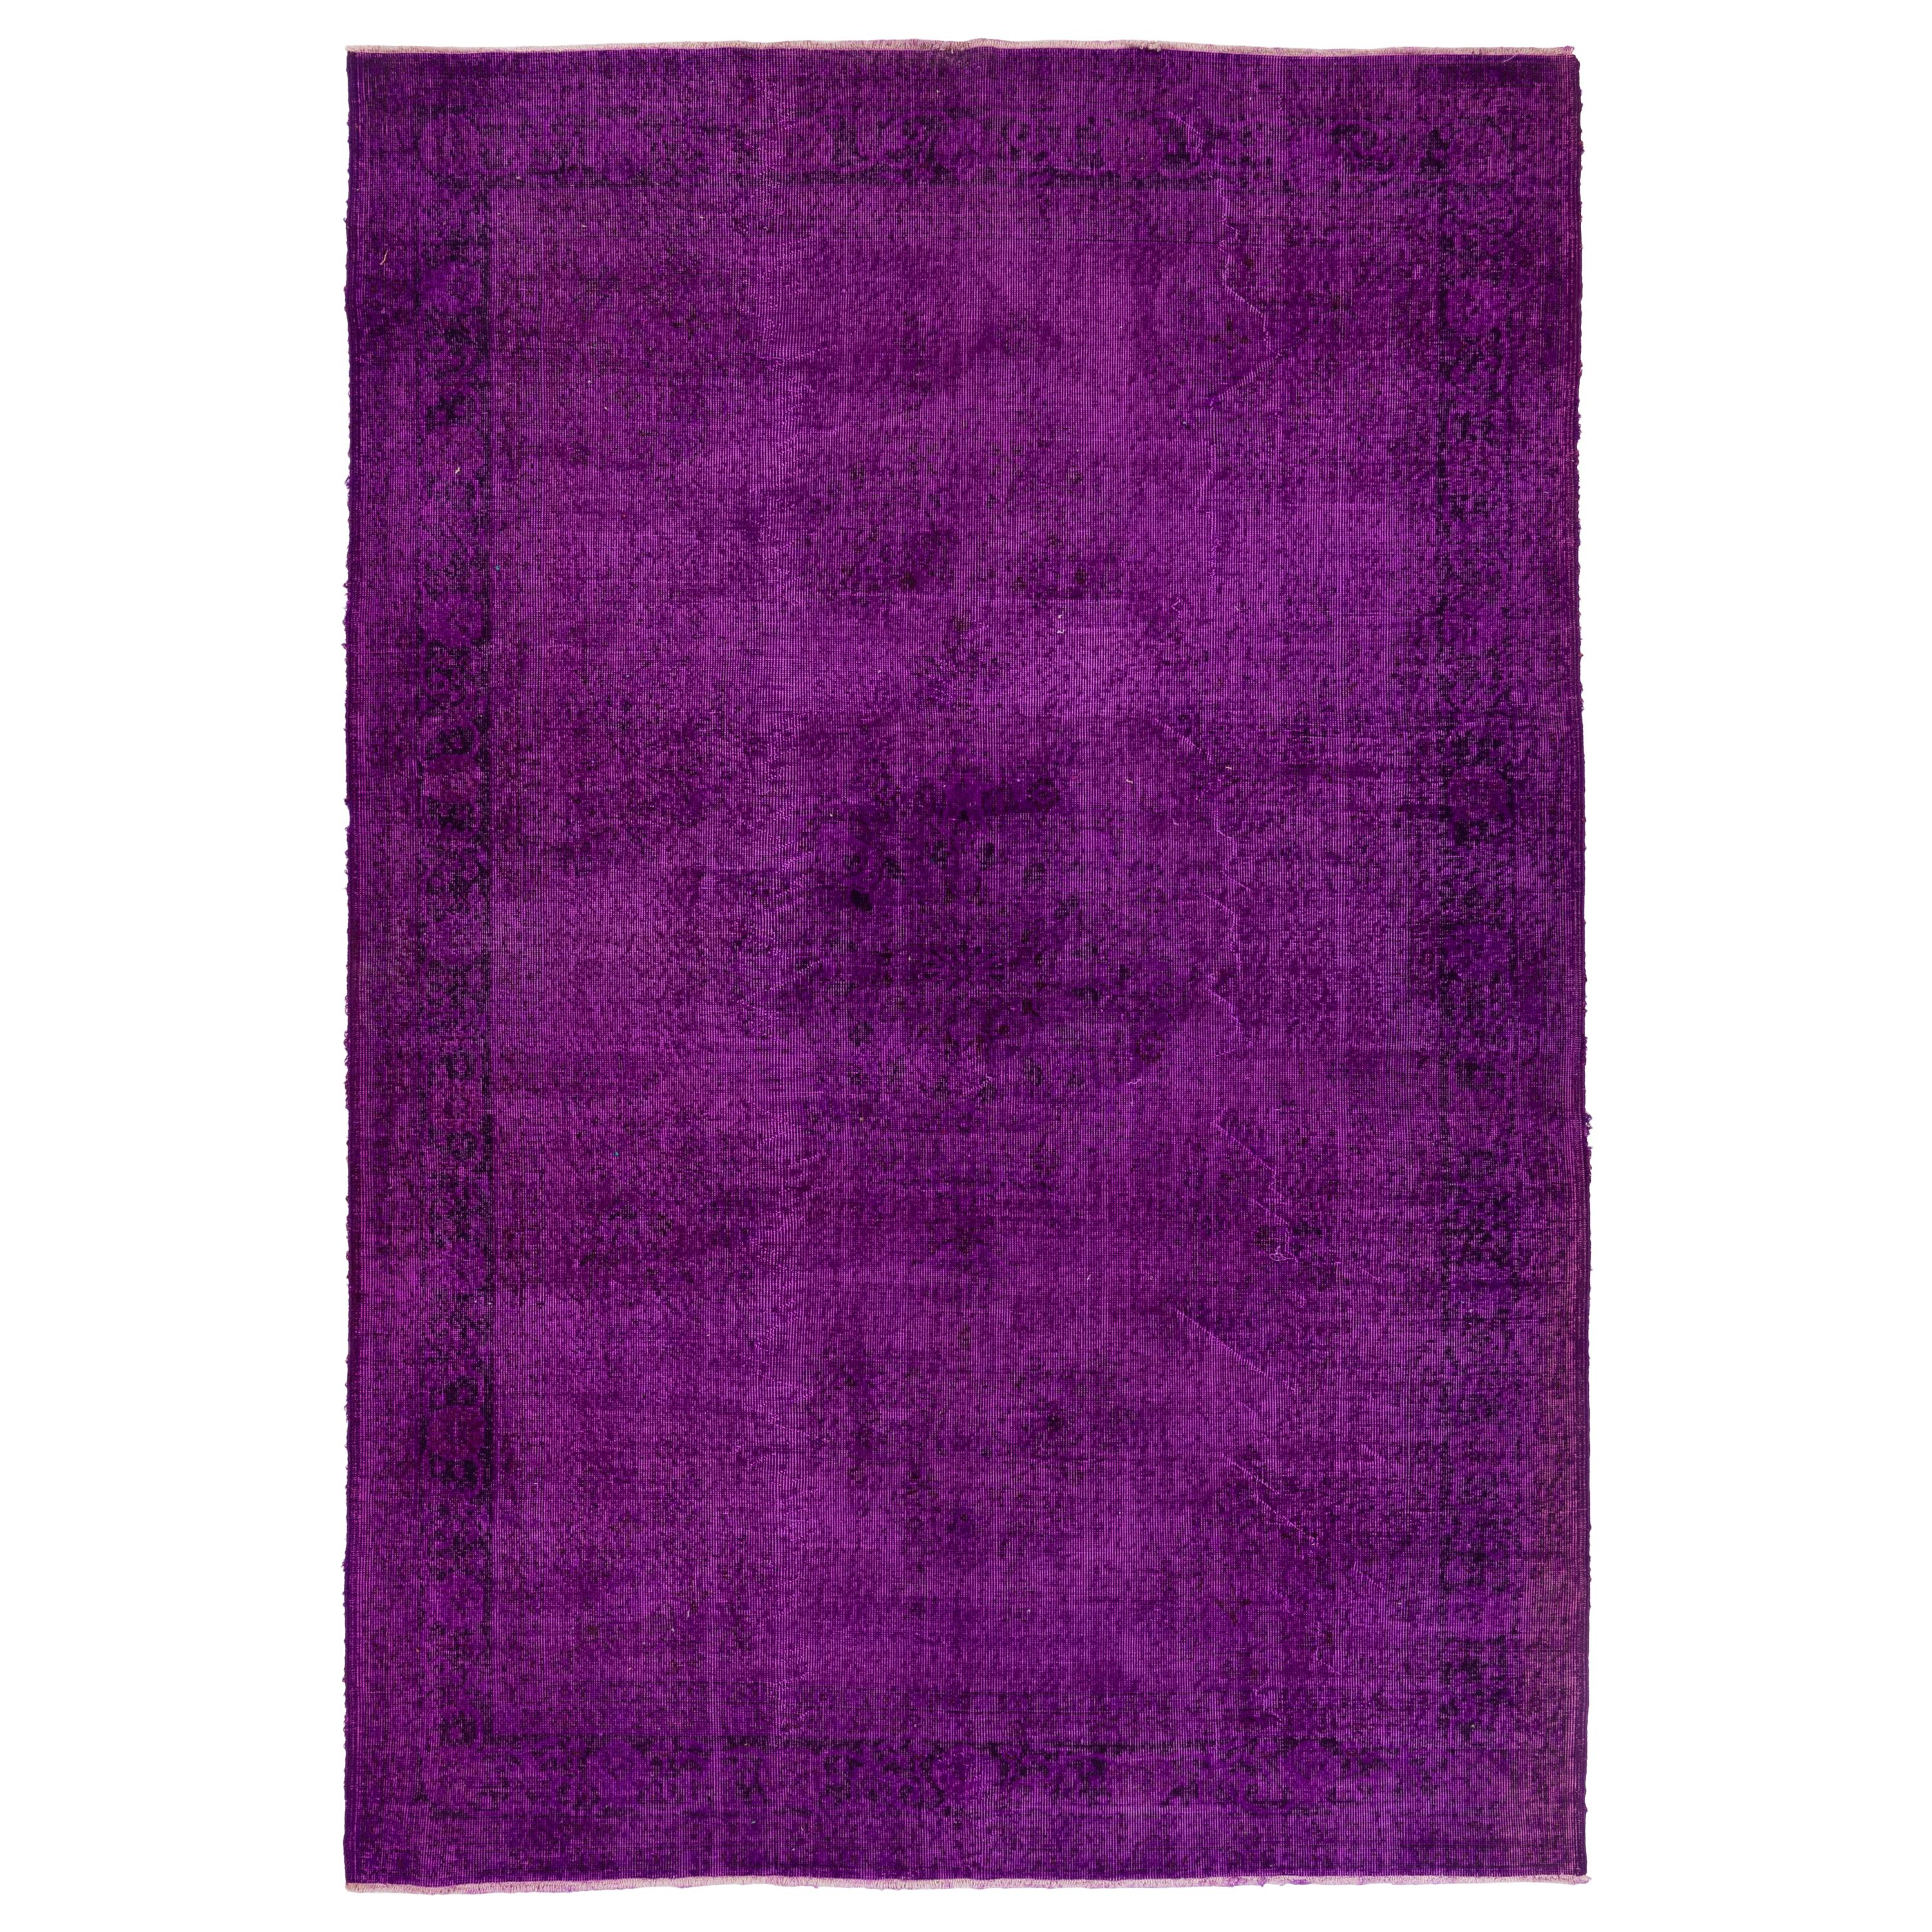 7x10.2 Ft Vintage Turkish Area Rug Overdyed in Purple Color for Modern Interiors